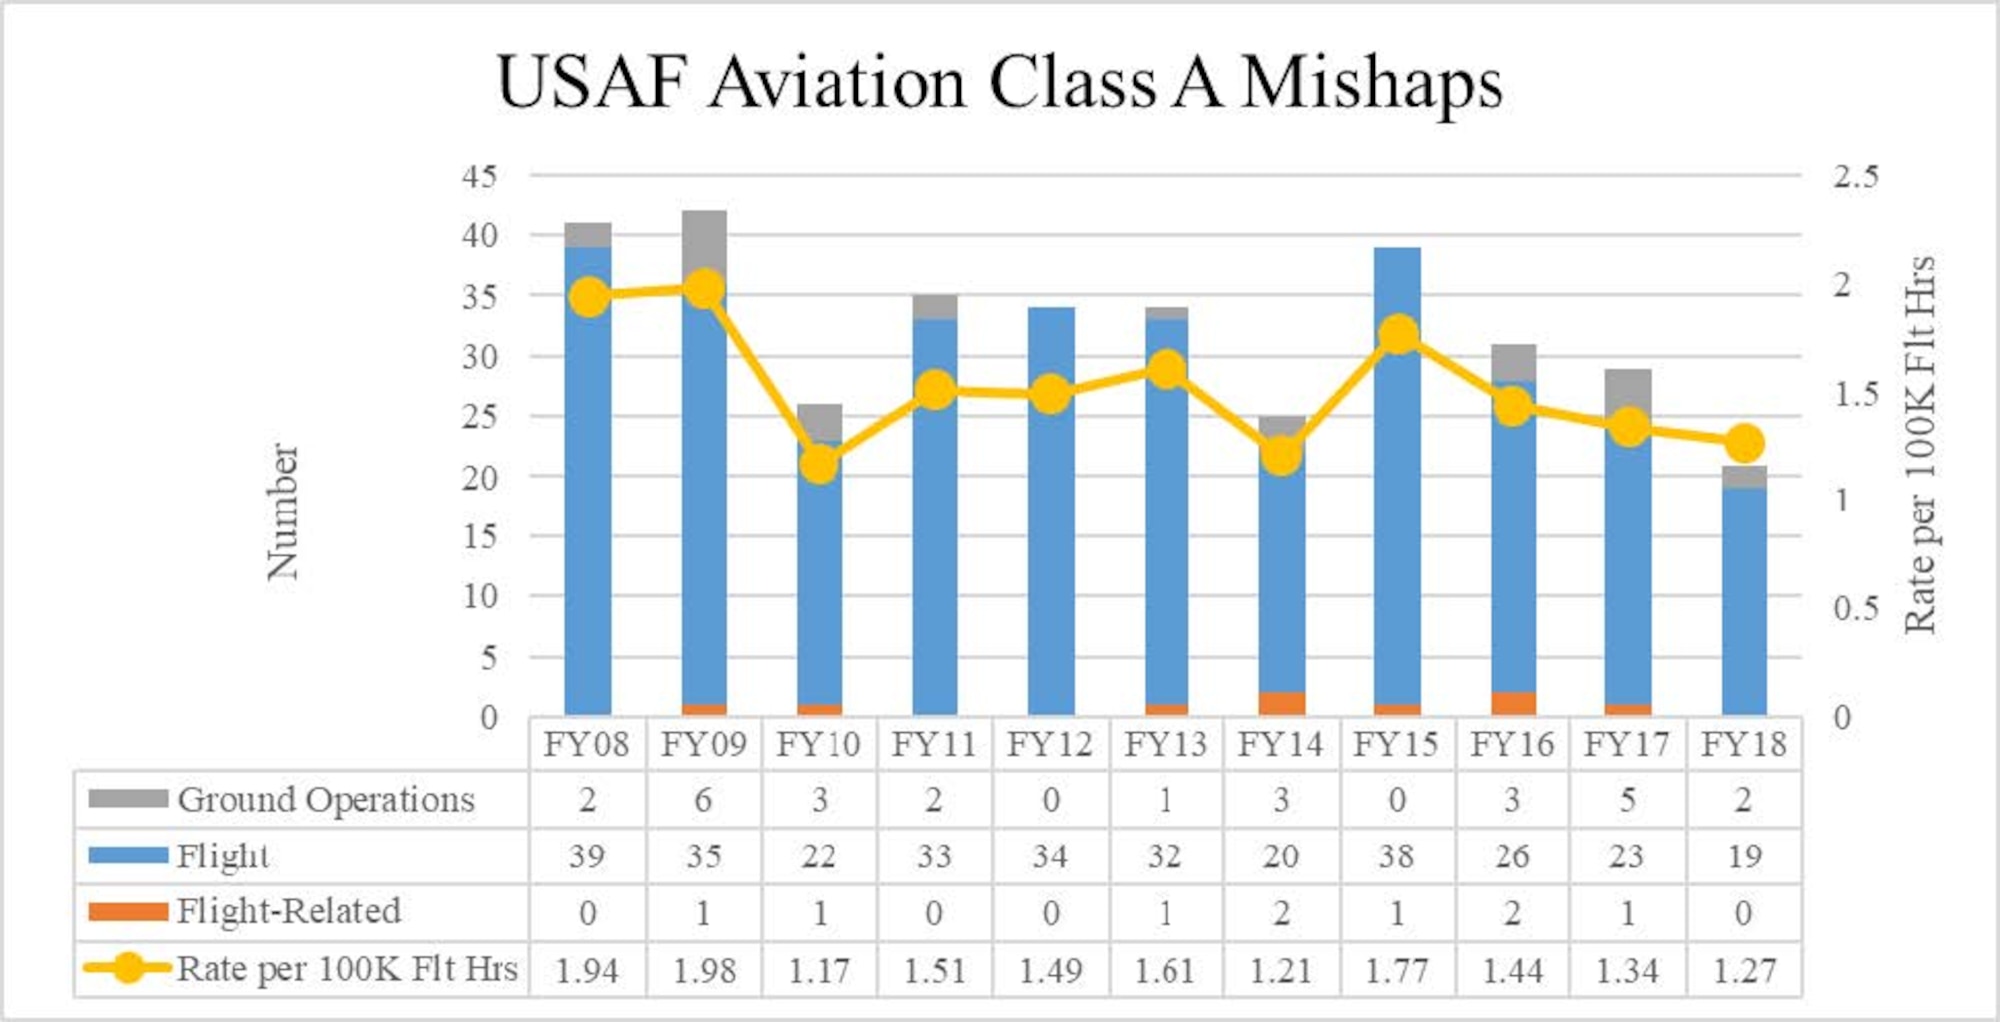 Aviation Class A Mishaps: 
The U.S. Air Force defines Class A mishaps as a mishap resulting in direct cost totaling $2 million or more, fatality or permanent total disability, or destruction of a DoD aircraft. Aviation combined unmanned and manned Class A mishaps are on a downward trend.